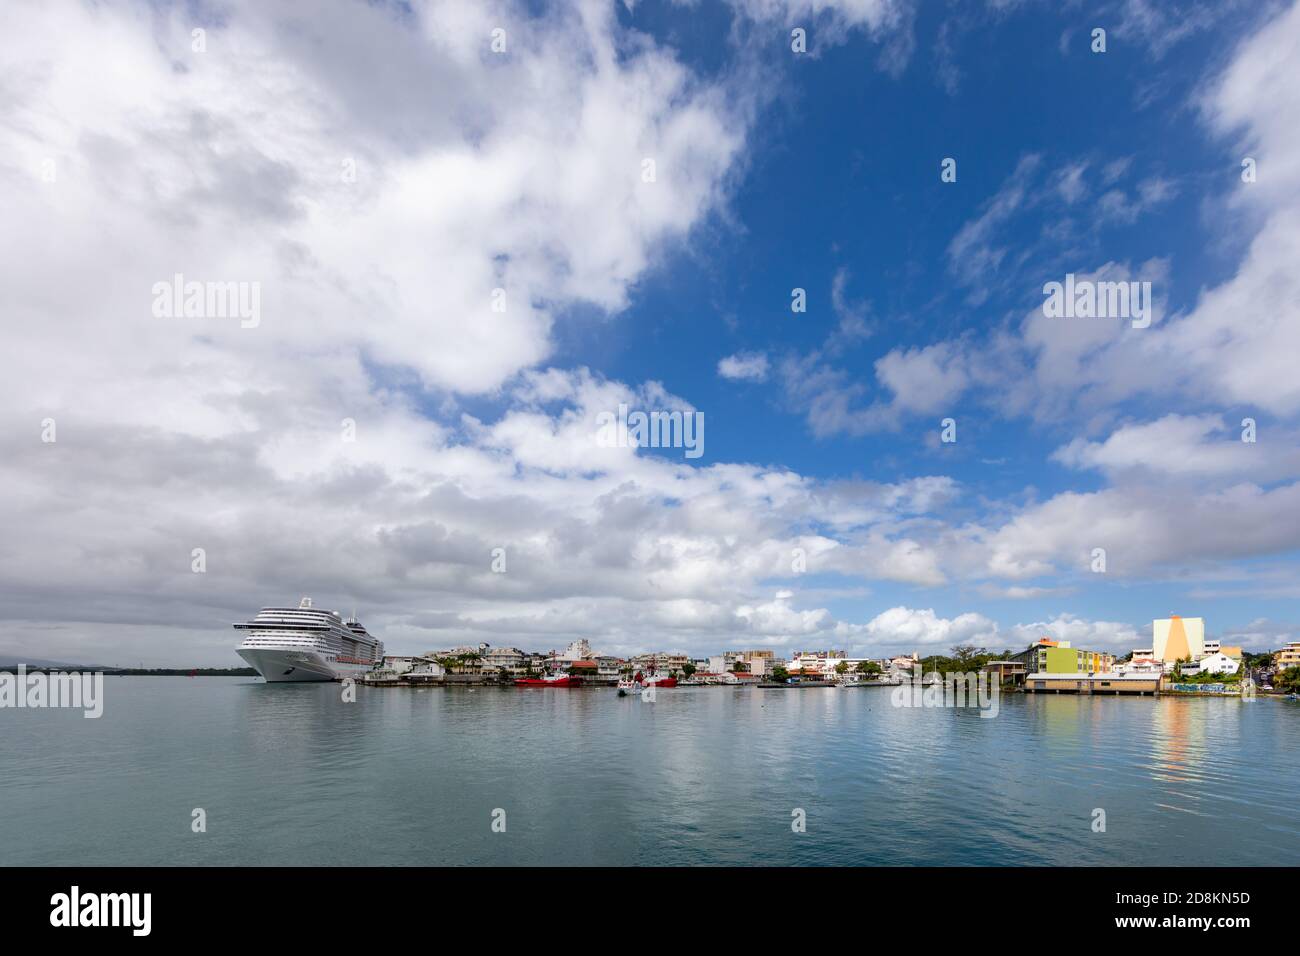 5 JAN 2020 - Pointe-a-Pitre, Guadeloupe, FWI - Cruise ship in the harbor Stock Photo